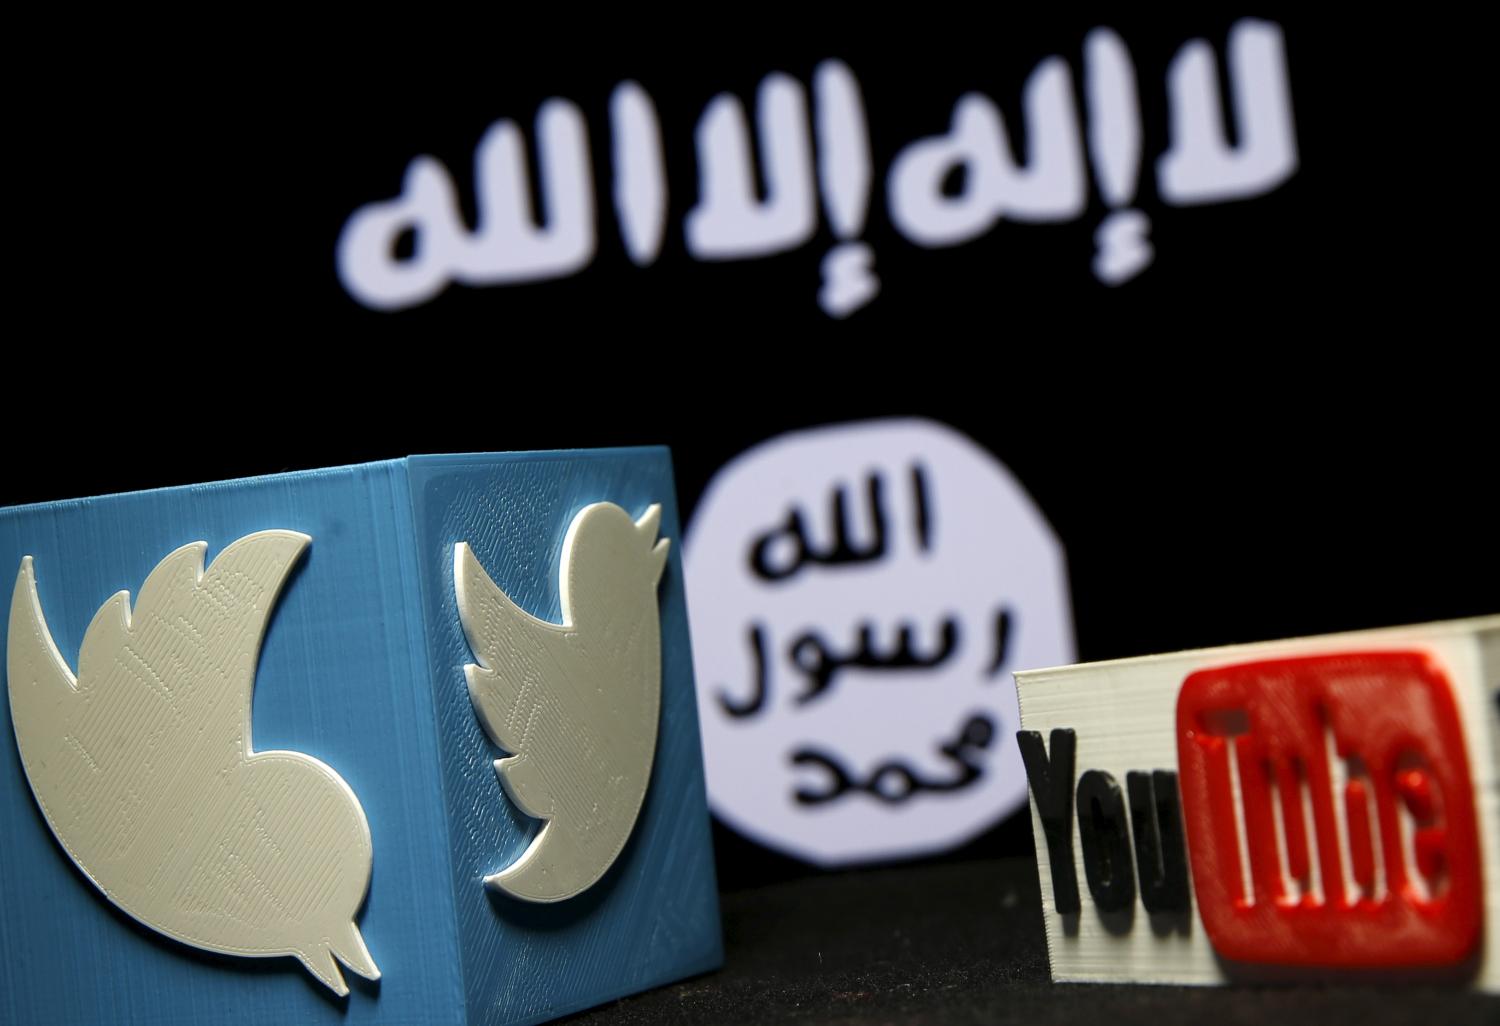 A 3D plastic representation of the Twitter and Youtube logo is seen in front of a displayed ISIS flag in this photo illustration in Zenica, Bosnia and Herzegovina, February 3, 2016. Iraq is trying to persuade satellite firms to halt Internet services in areas under Islamic State's rule, seeking to deal a major blow to the group's potent propaganda machine which relies heavily on social media to inspire its followers to wage jihad. Picture taken February 3, 2016. To match Insight MIDEAST-CRISIS/IRAQ-INTERNET REUTERS/Dado Ruvic - GF10000295345